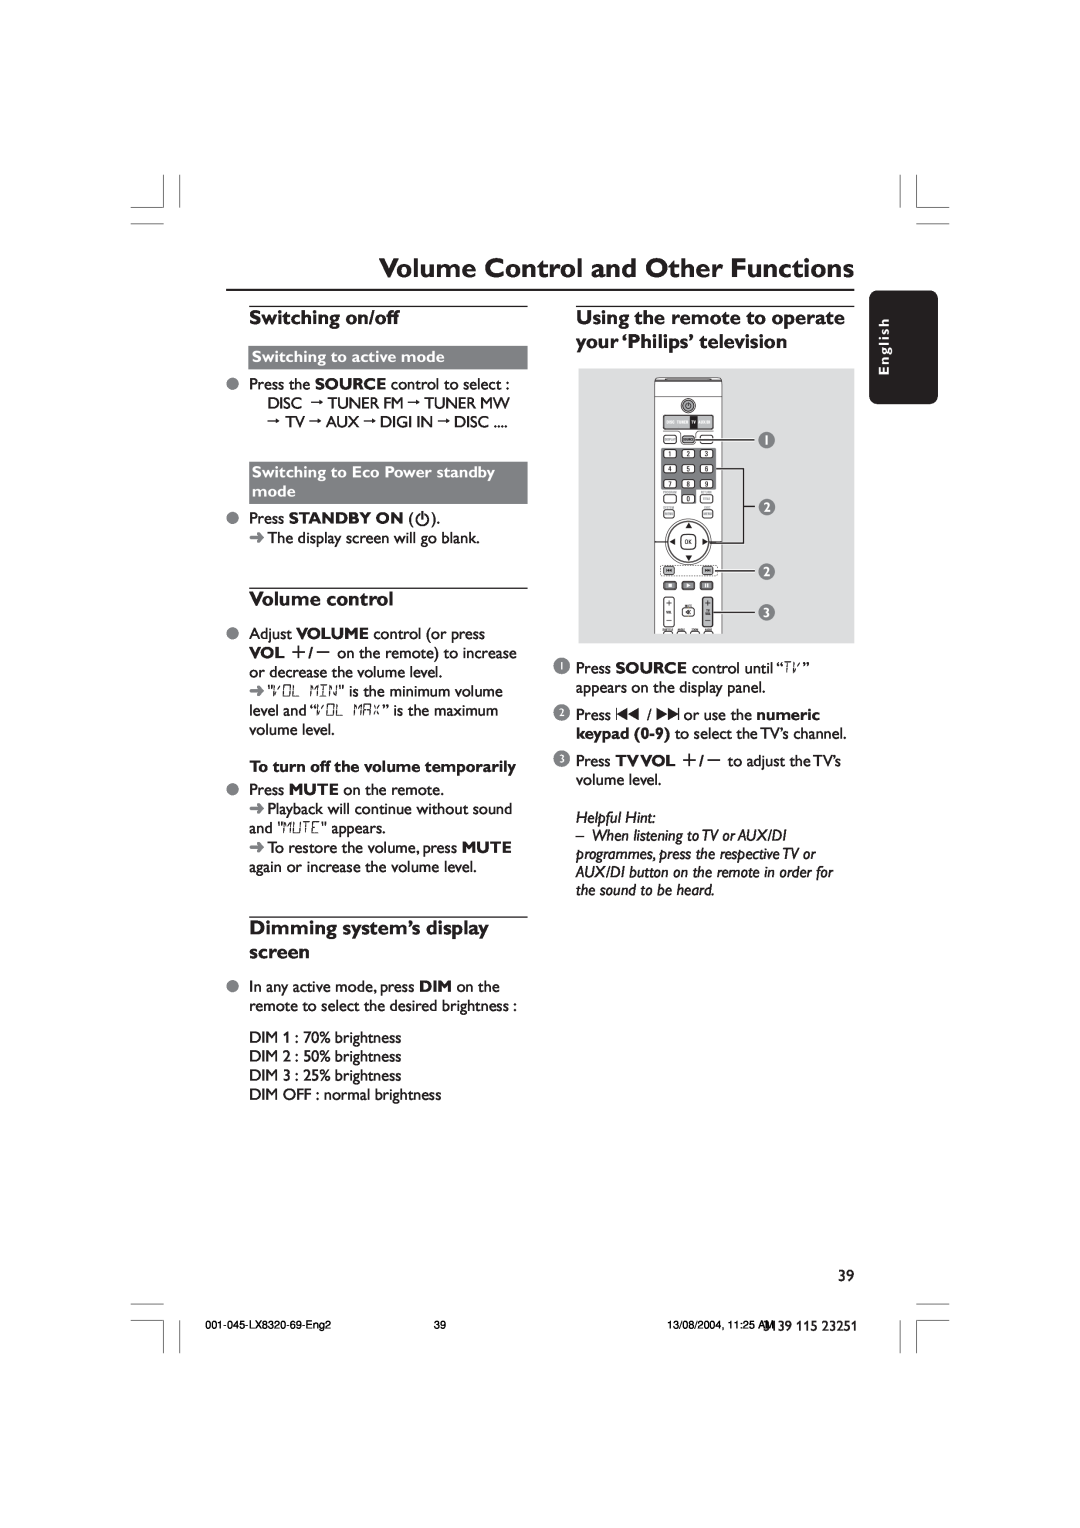 Philips LX8320 user manual Volume Control and Other Functions, Switching on/off, your ‘Philips’ television, Volume control 